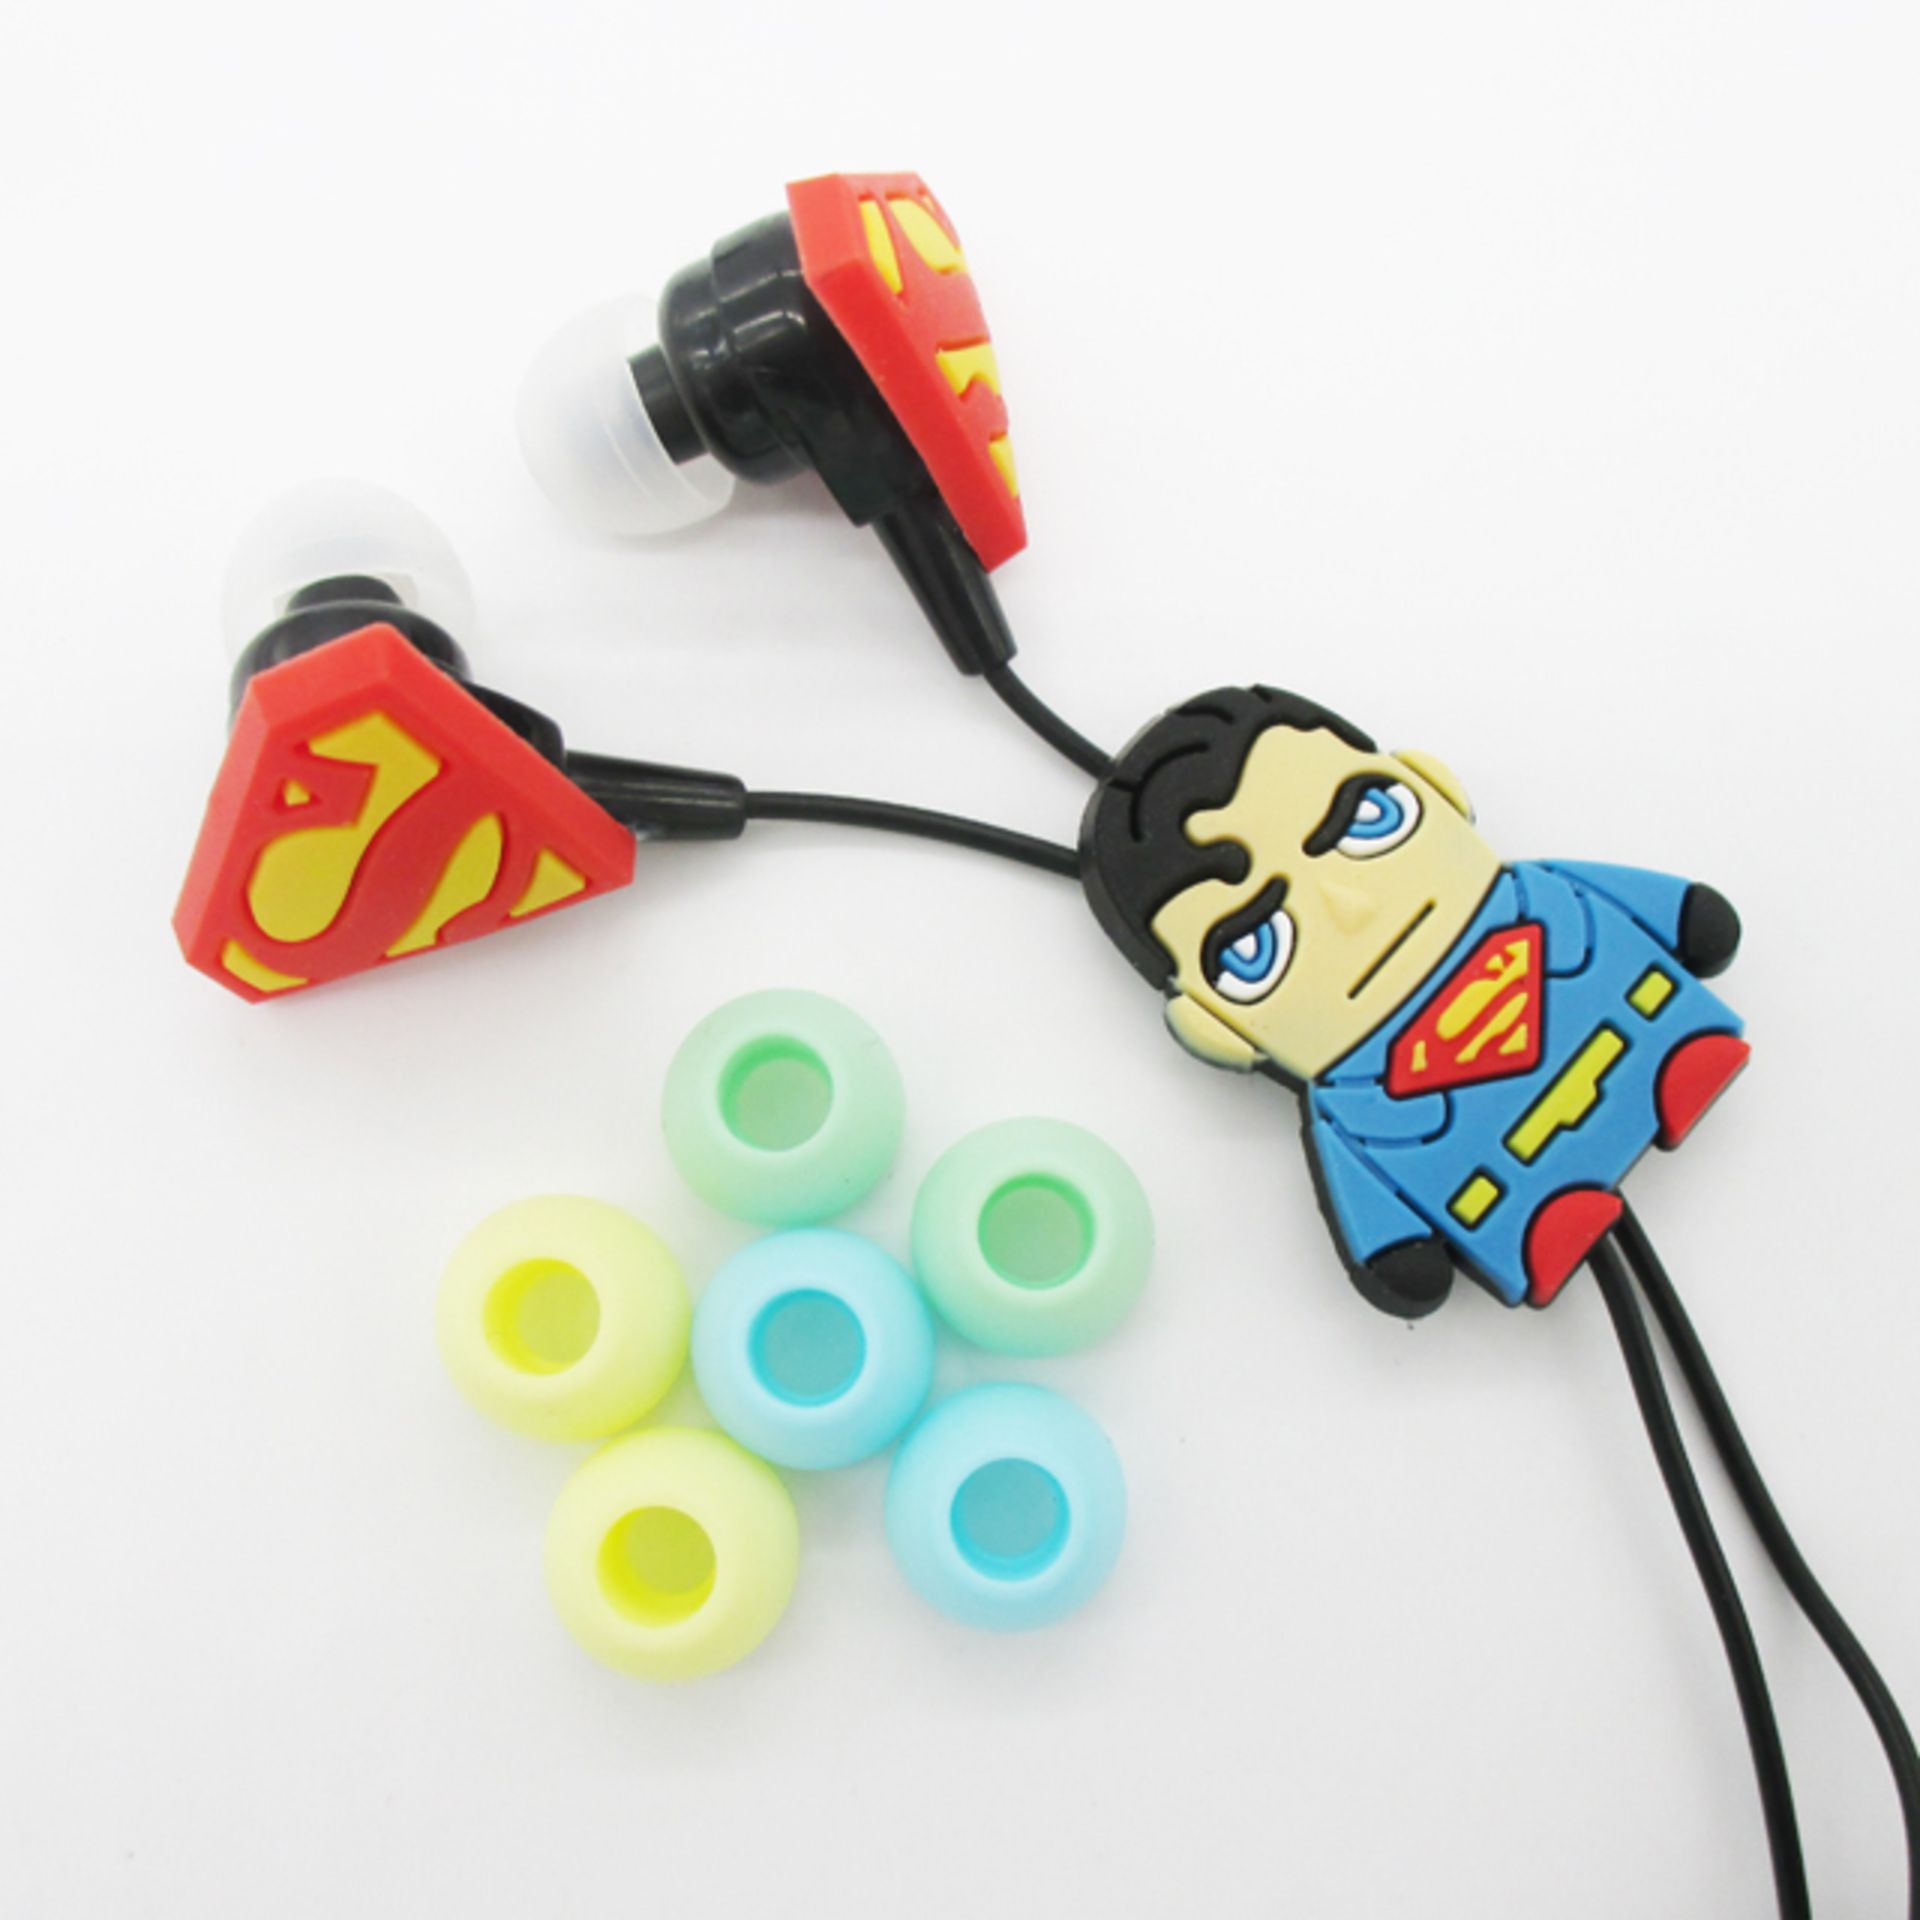 Brand New Pair Of Superman Earphones With Logo Character And Changeable Multicoloured Earpieces X 4